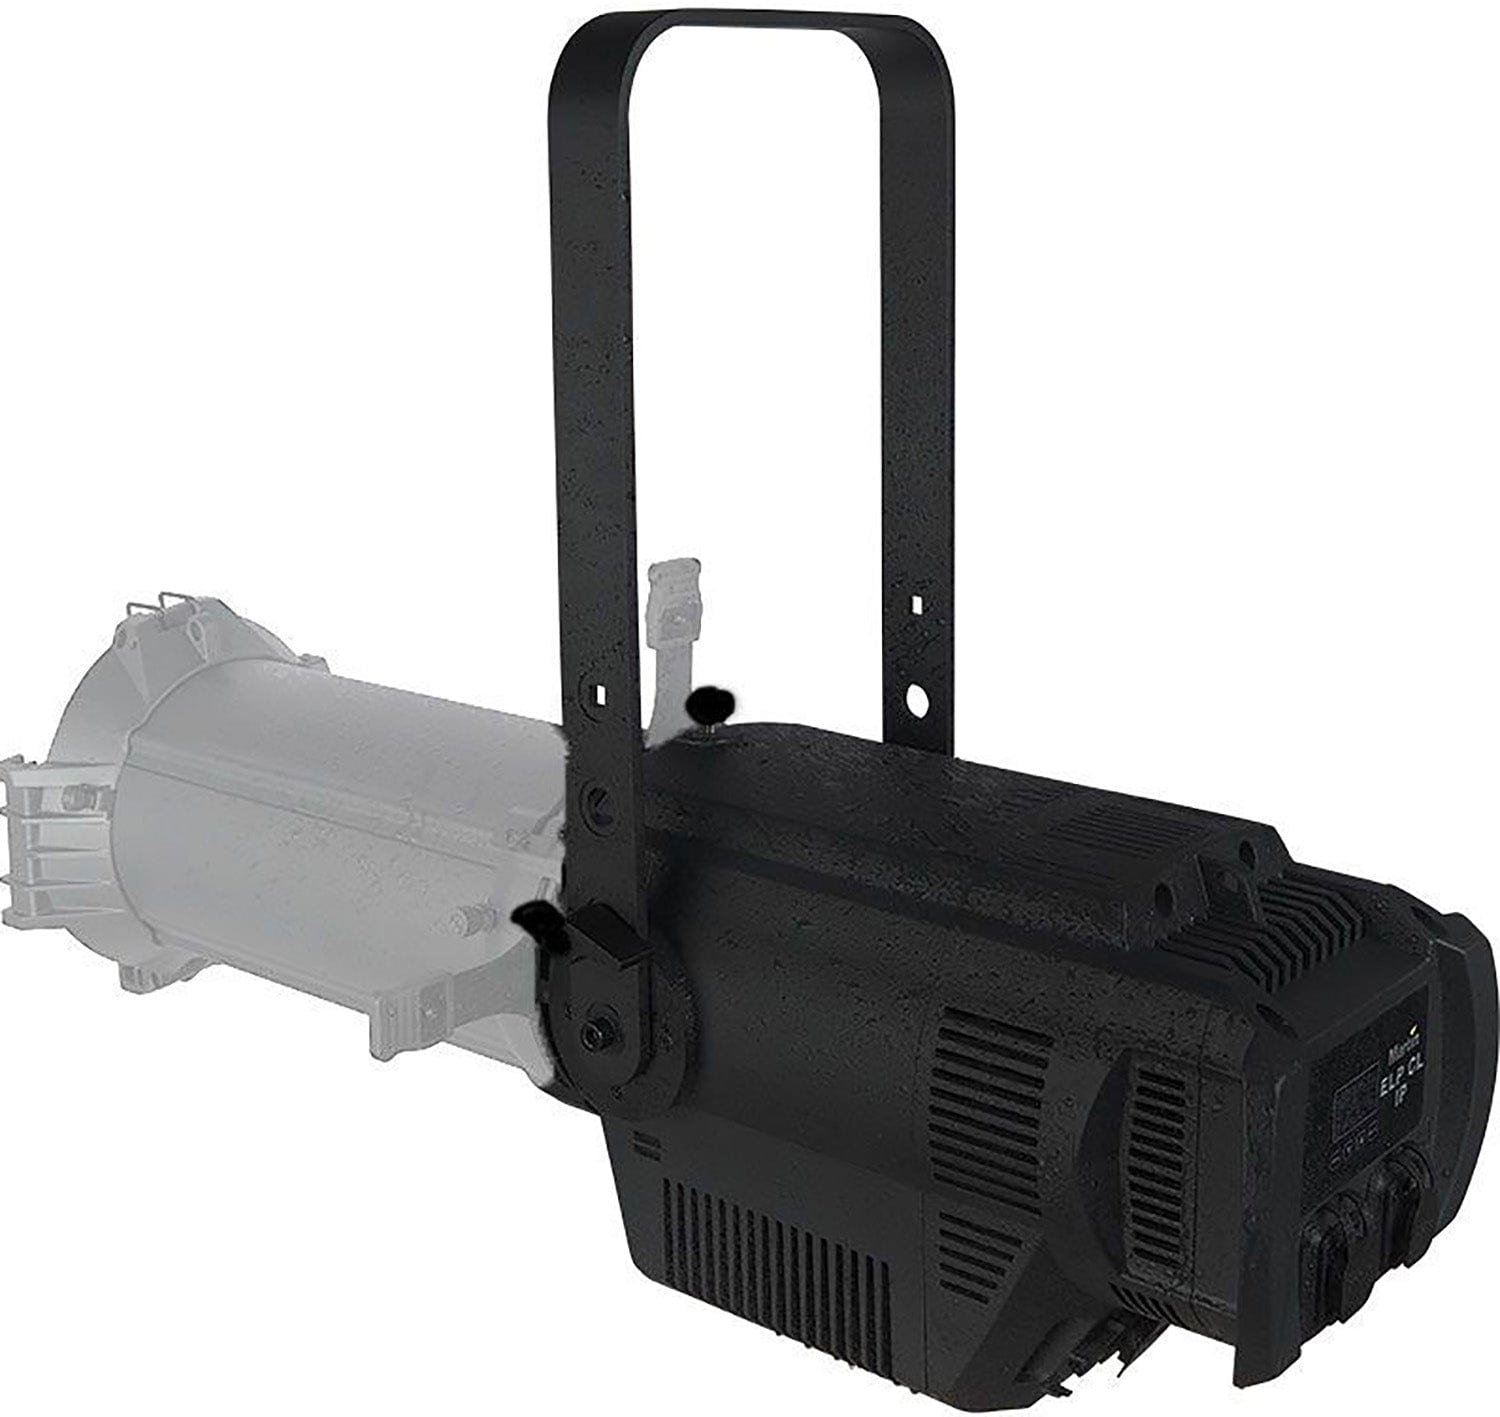 Martin ELP CL IP Color LED Ellipsoidal IP65-Rated Fixture Body - PSSL ProSound and Stage Lighting